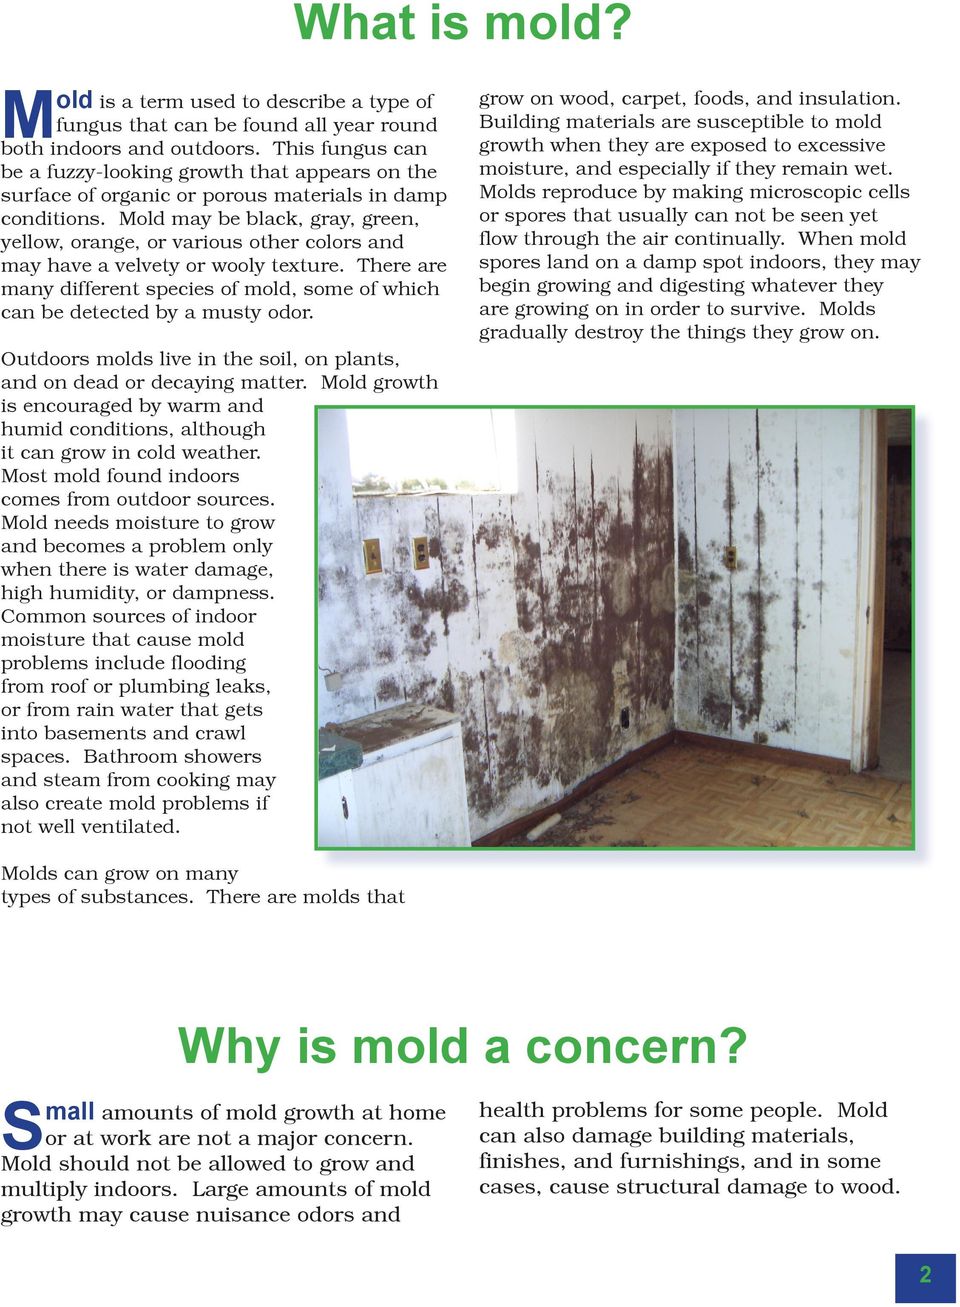 Mold may be black, gray, green, yellow, orange, or various other colors and may have a velvety or wooly texture.